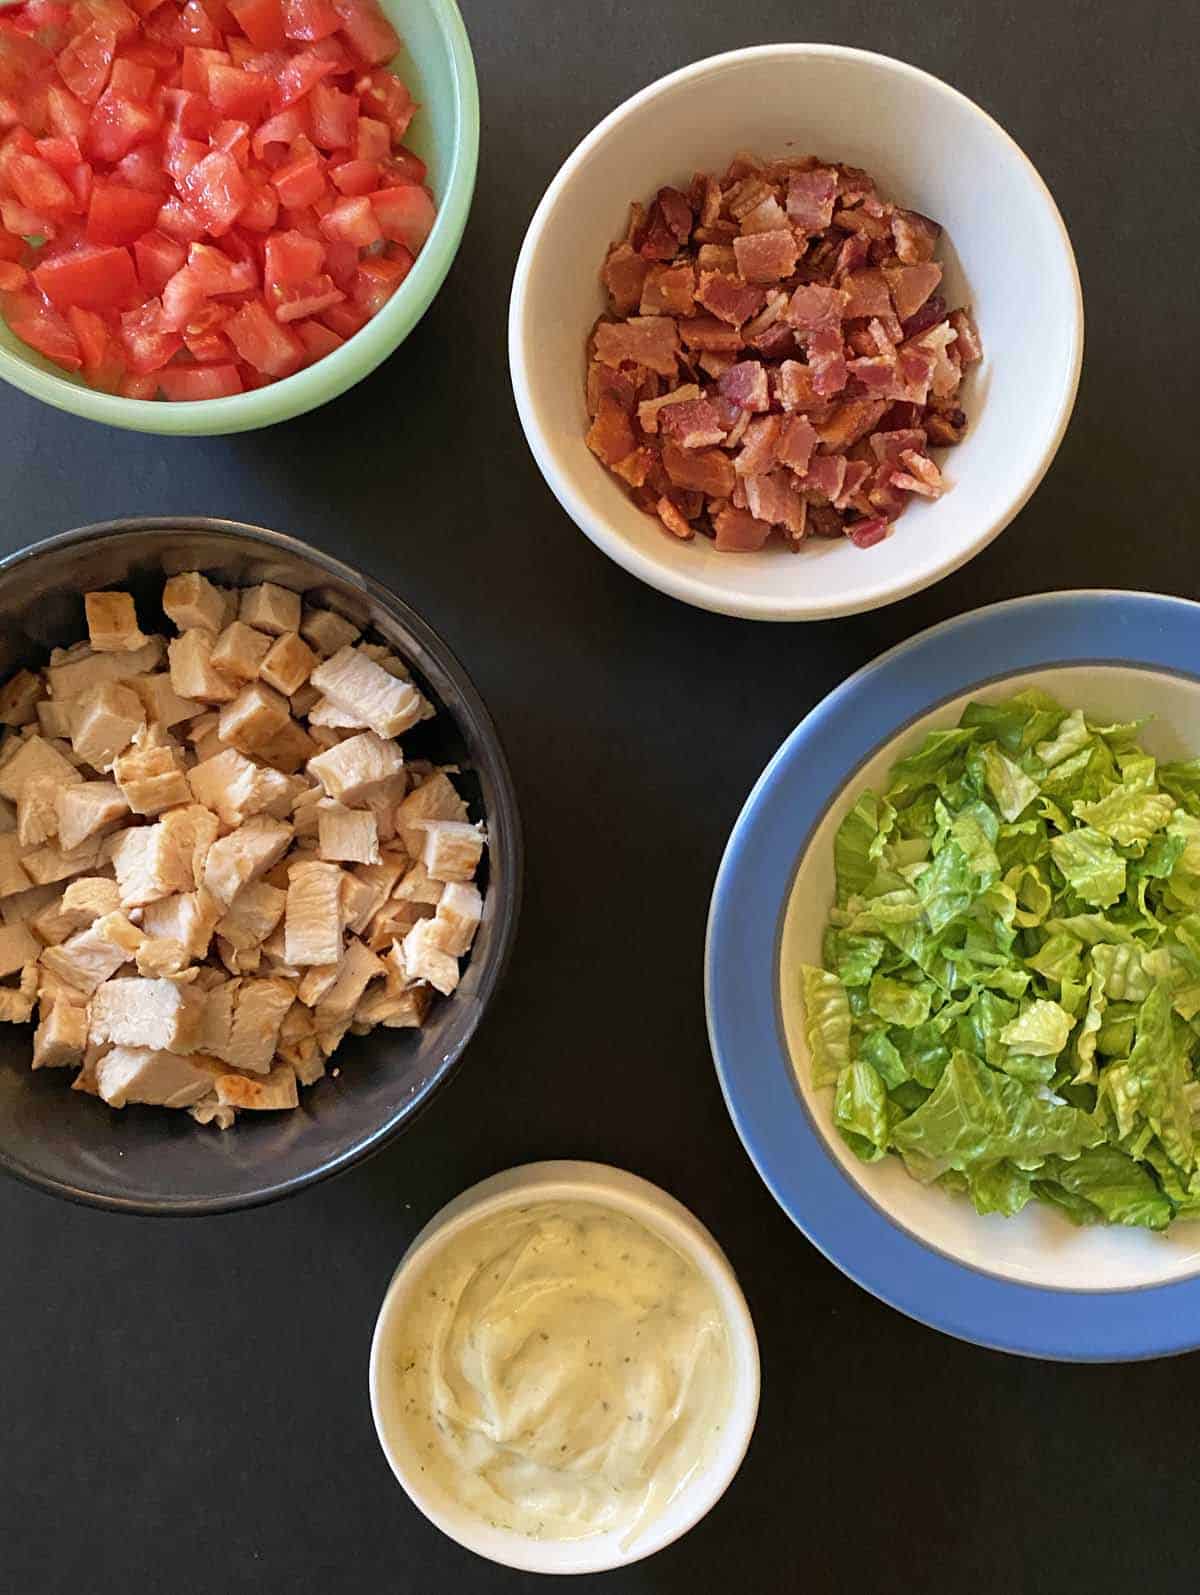 Small bowls containing chopped tomato, bacon, chicken, lettuce and ranch mayo. 